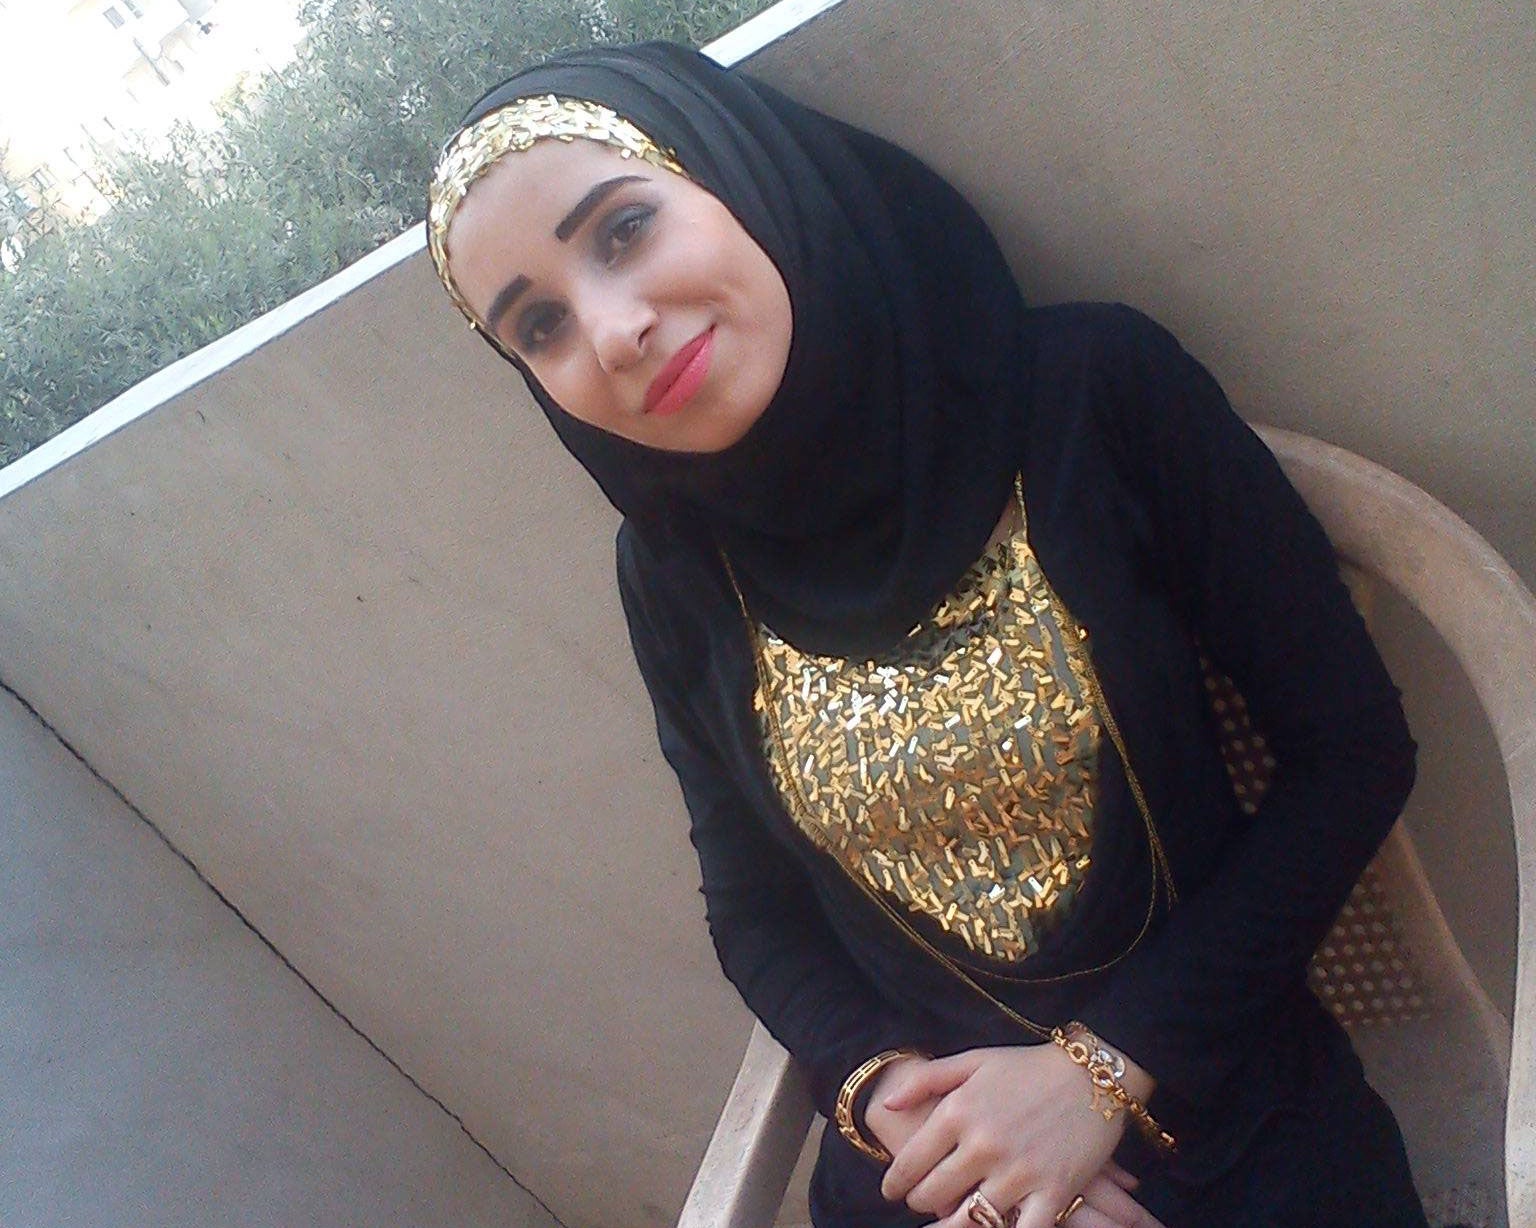 Citizen journalist Ruqia Hassan, who was executed by Isis earlier this month